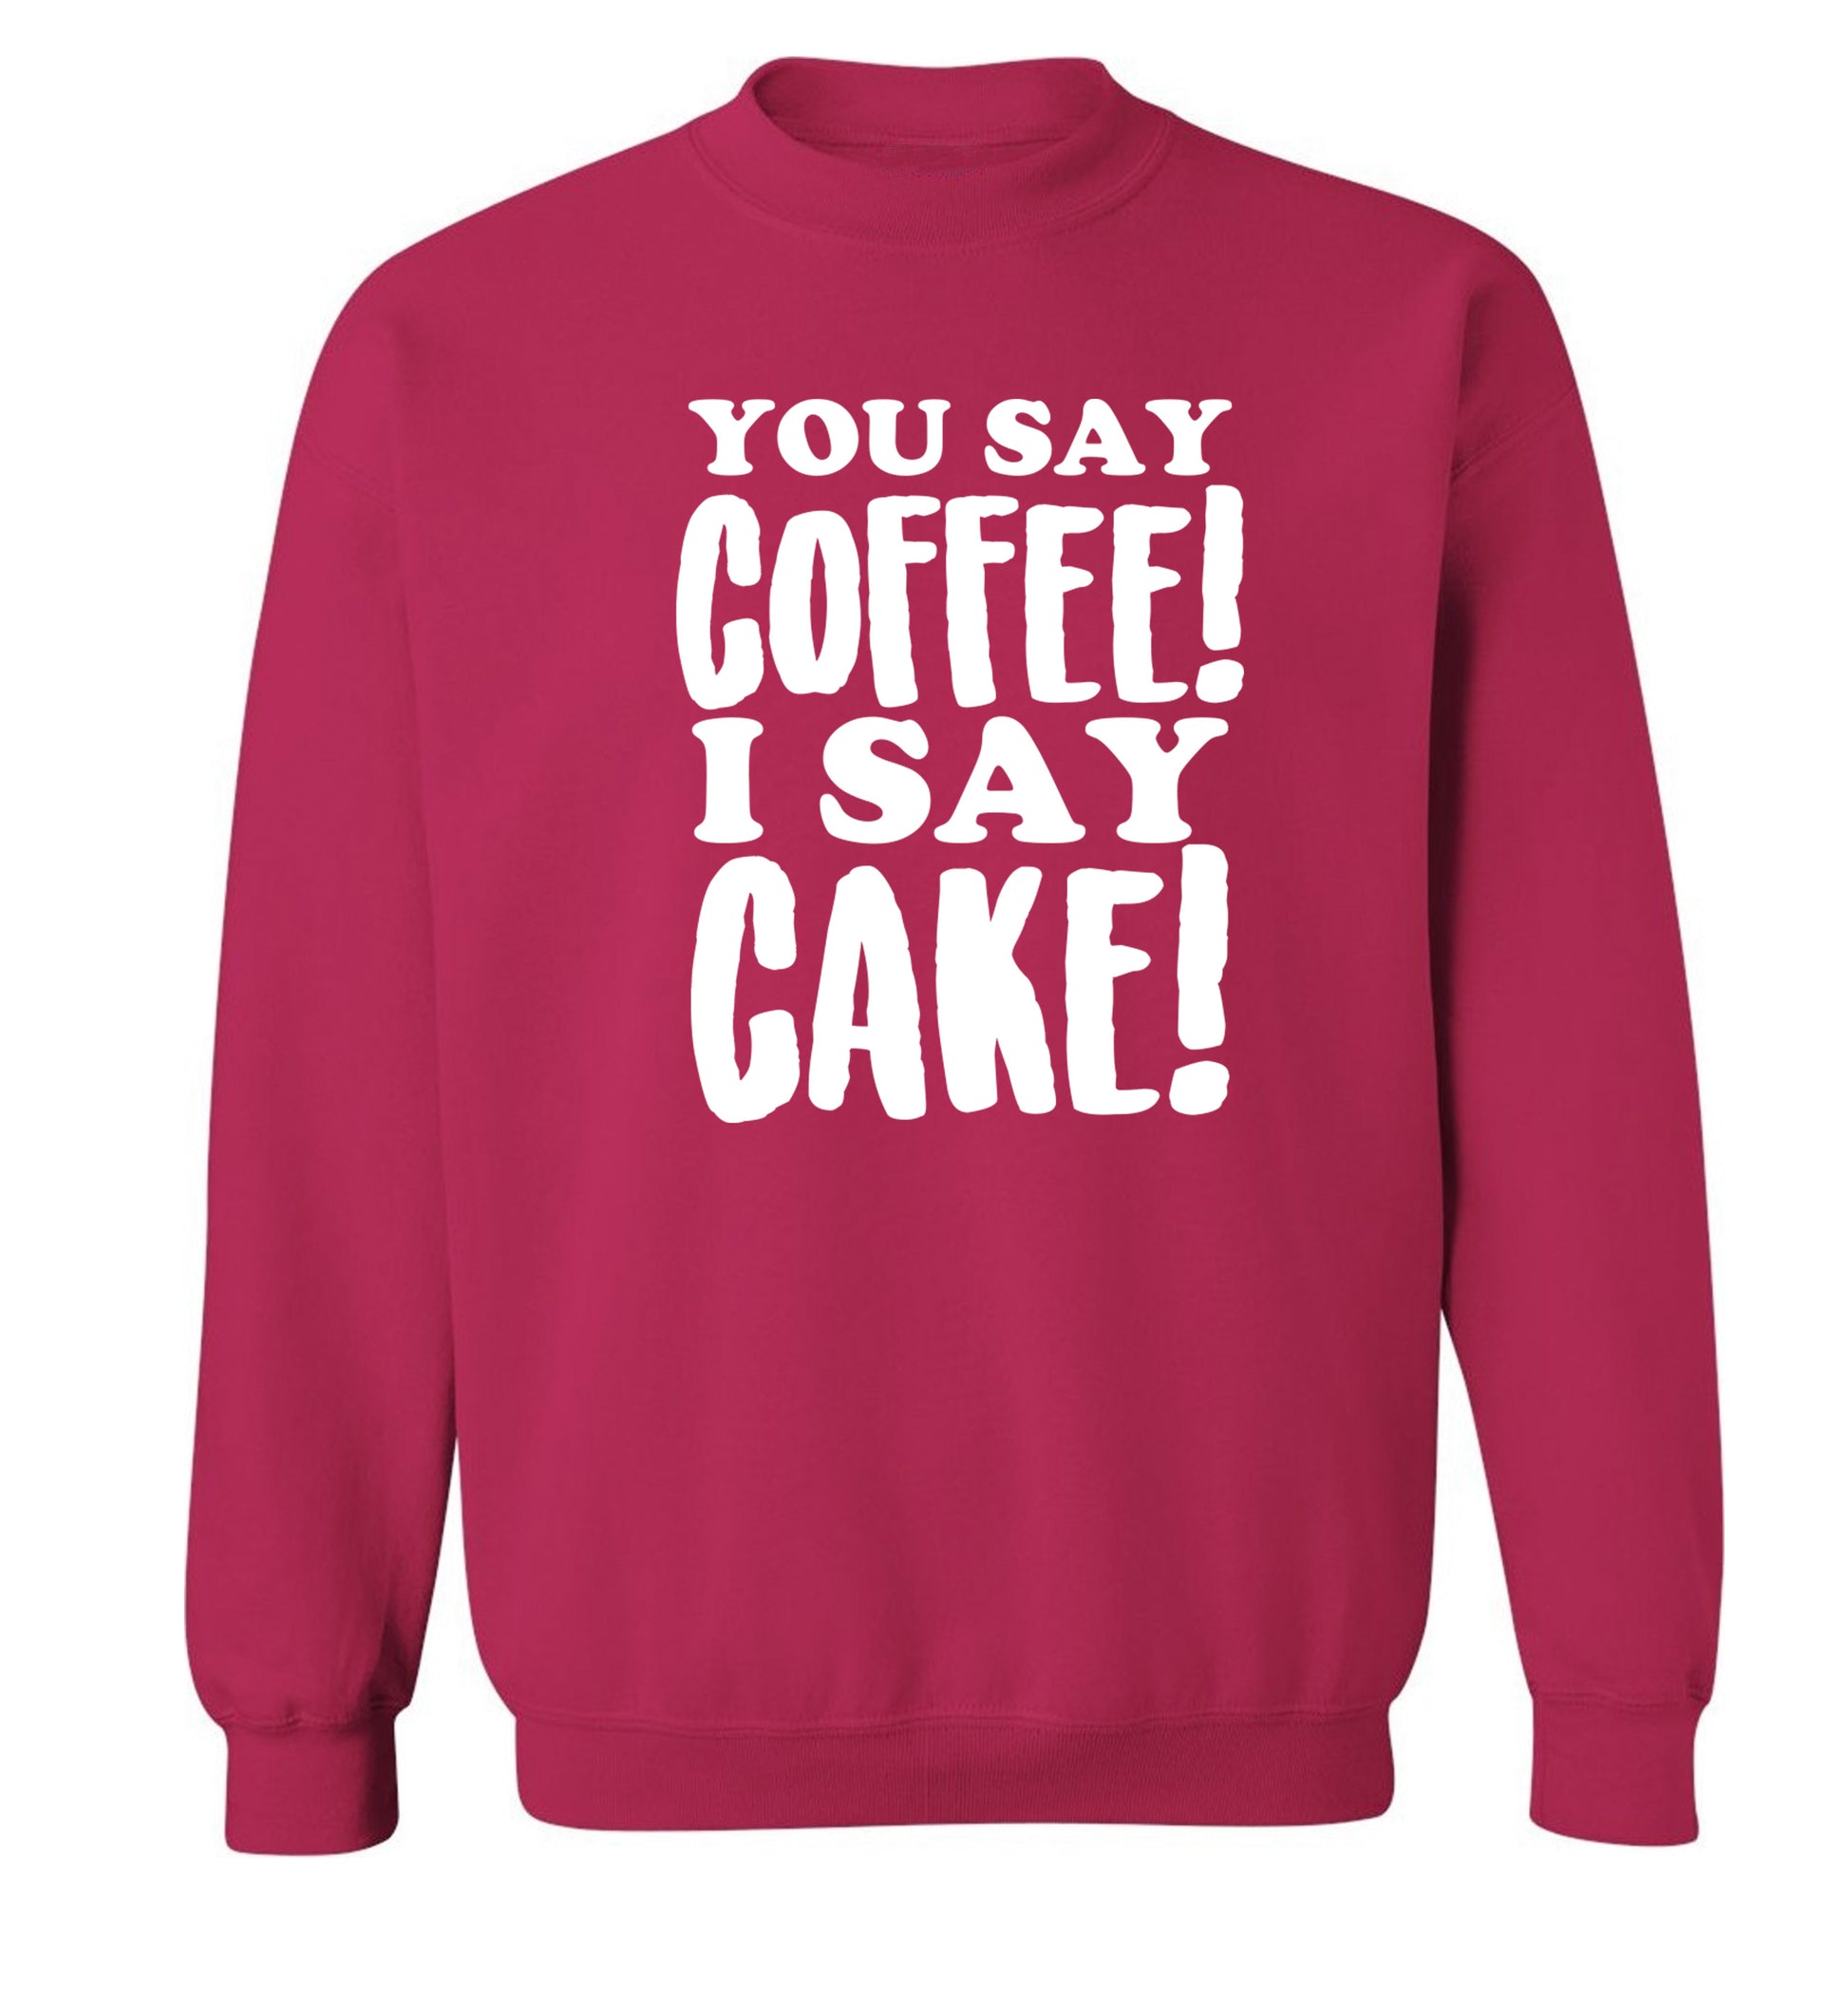 You say coffee I say cake! Adult's unisex pink Sweater 2XL